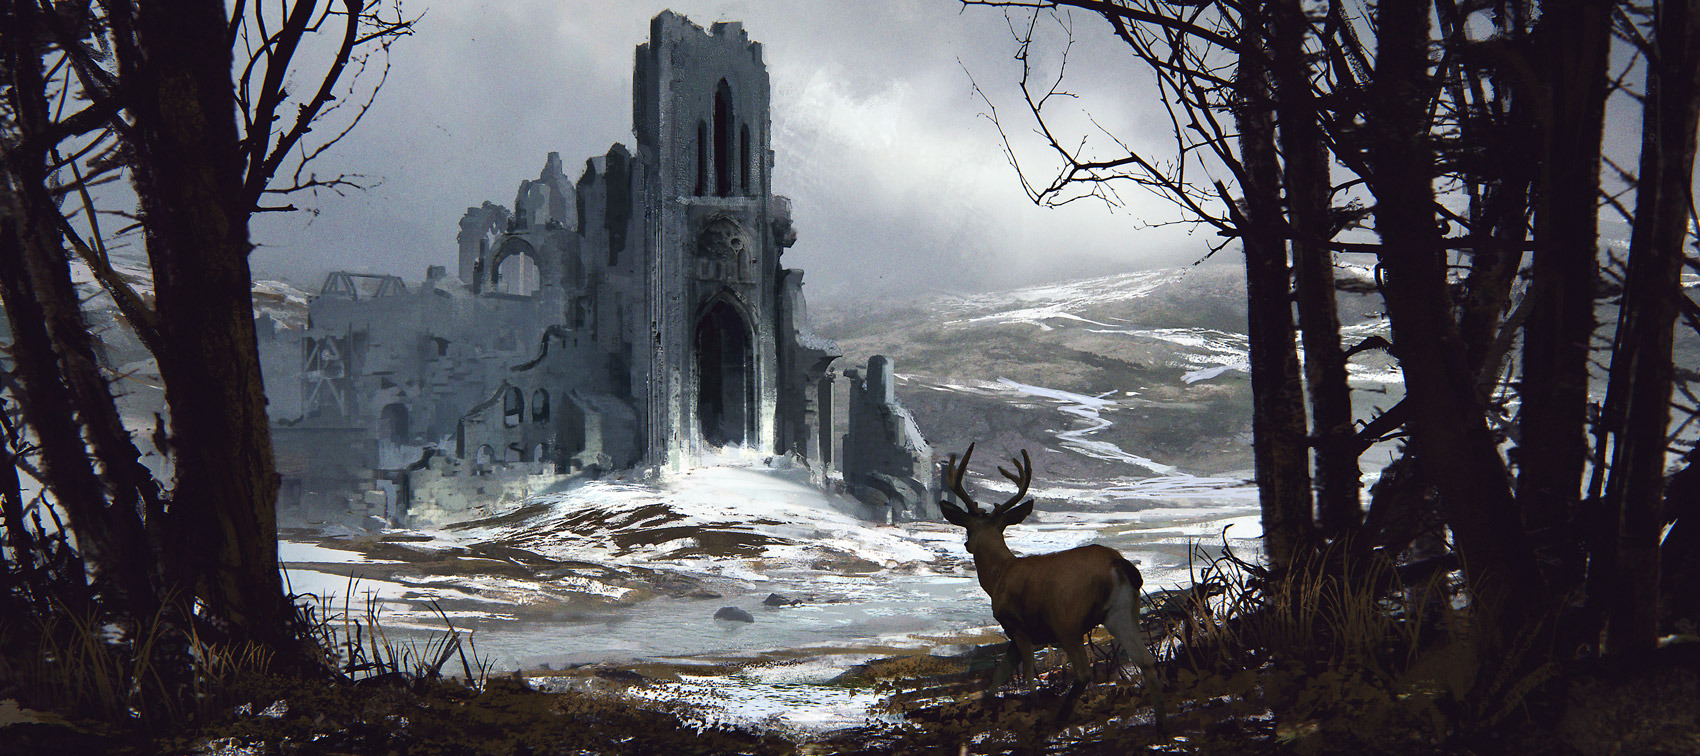 FOR LEASE: Old Castle (No Deer, Sorry)